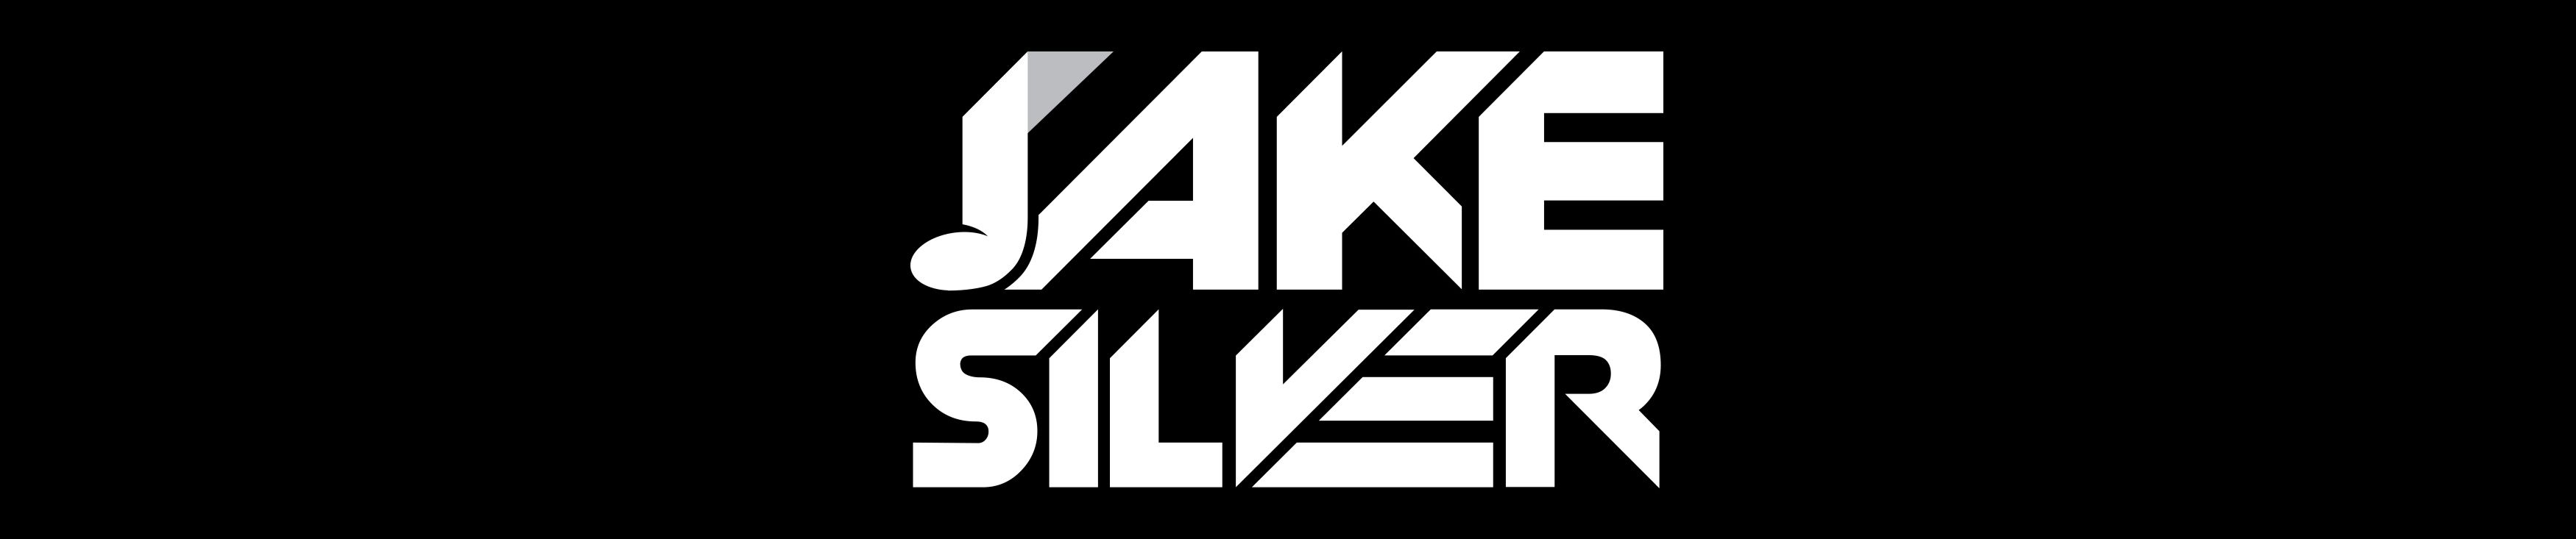 Stream Jake Silver music | Listen to songs, albums, playlists for free on  SoundCloud